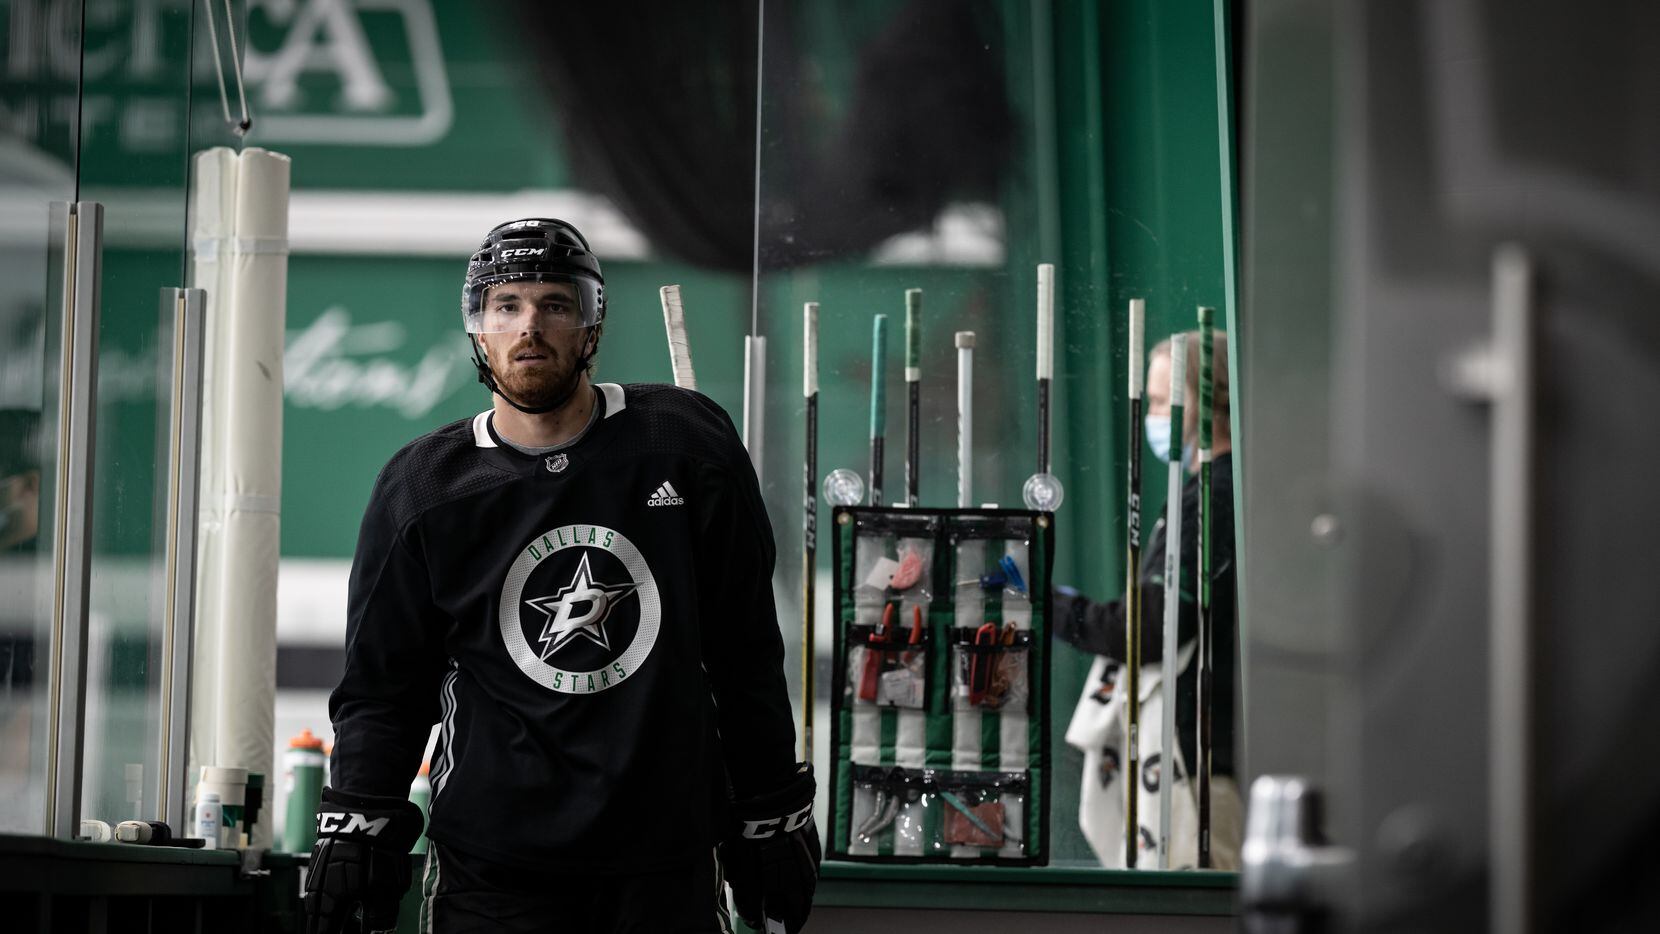 Stephen Johns (28) is seen as the Dallas Stars opened postseason training camp at the Comerica Center, Monday July 13, 2020 in Frisco, Texas. The Dallas team was together in the same building for the first time Monday since the NHL went on hiatus due to the coronavirus pandemic.